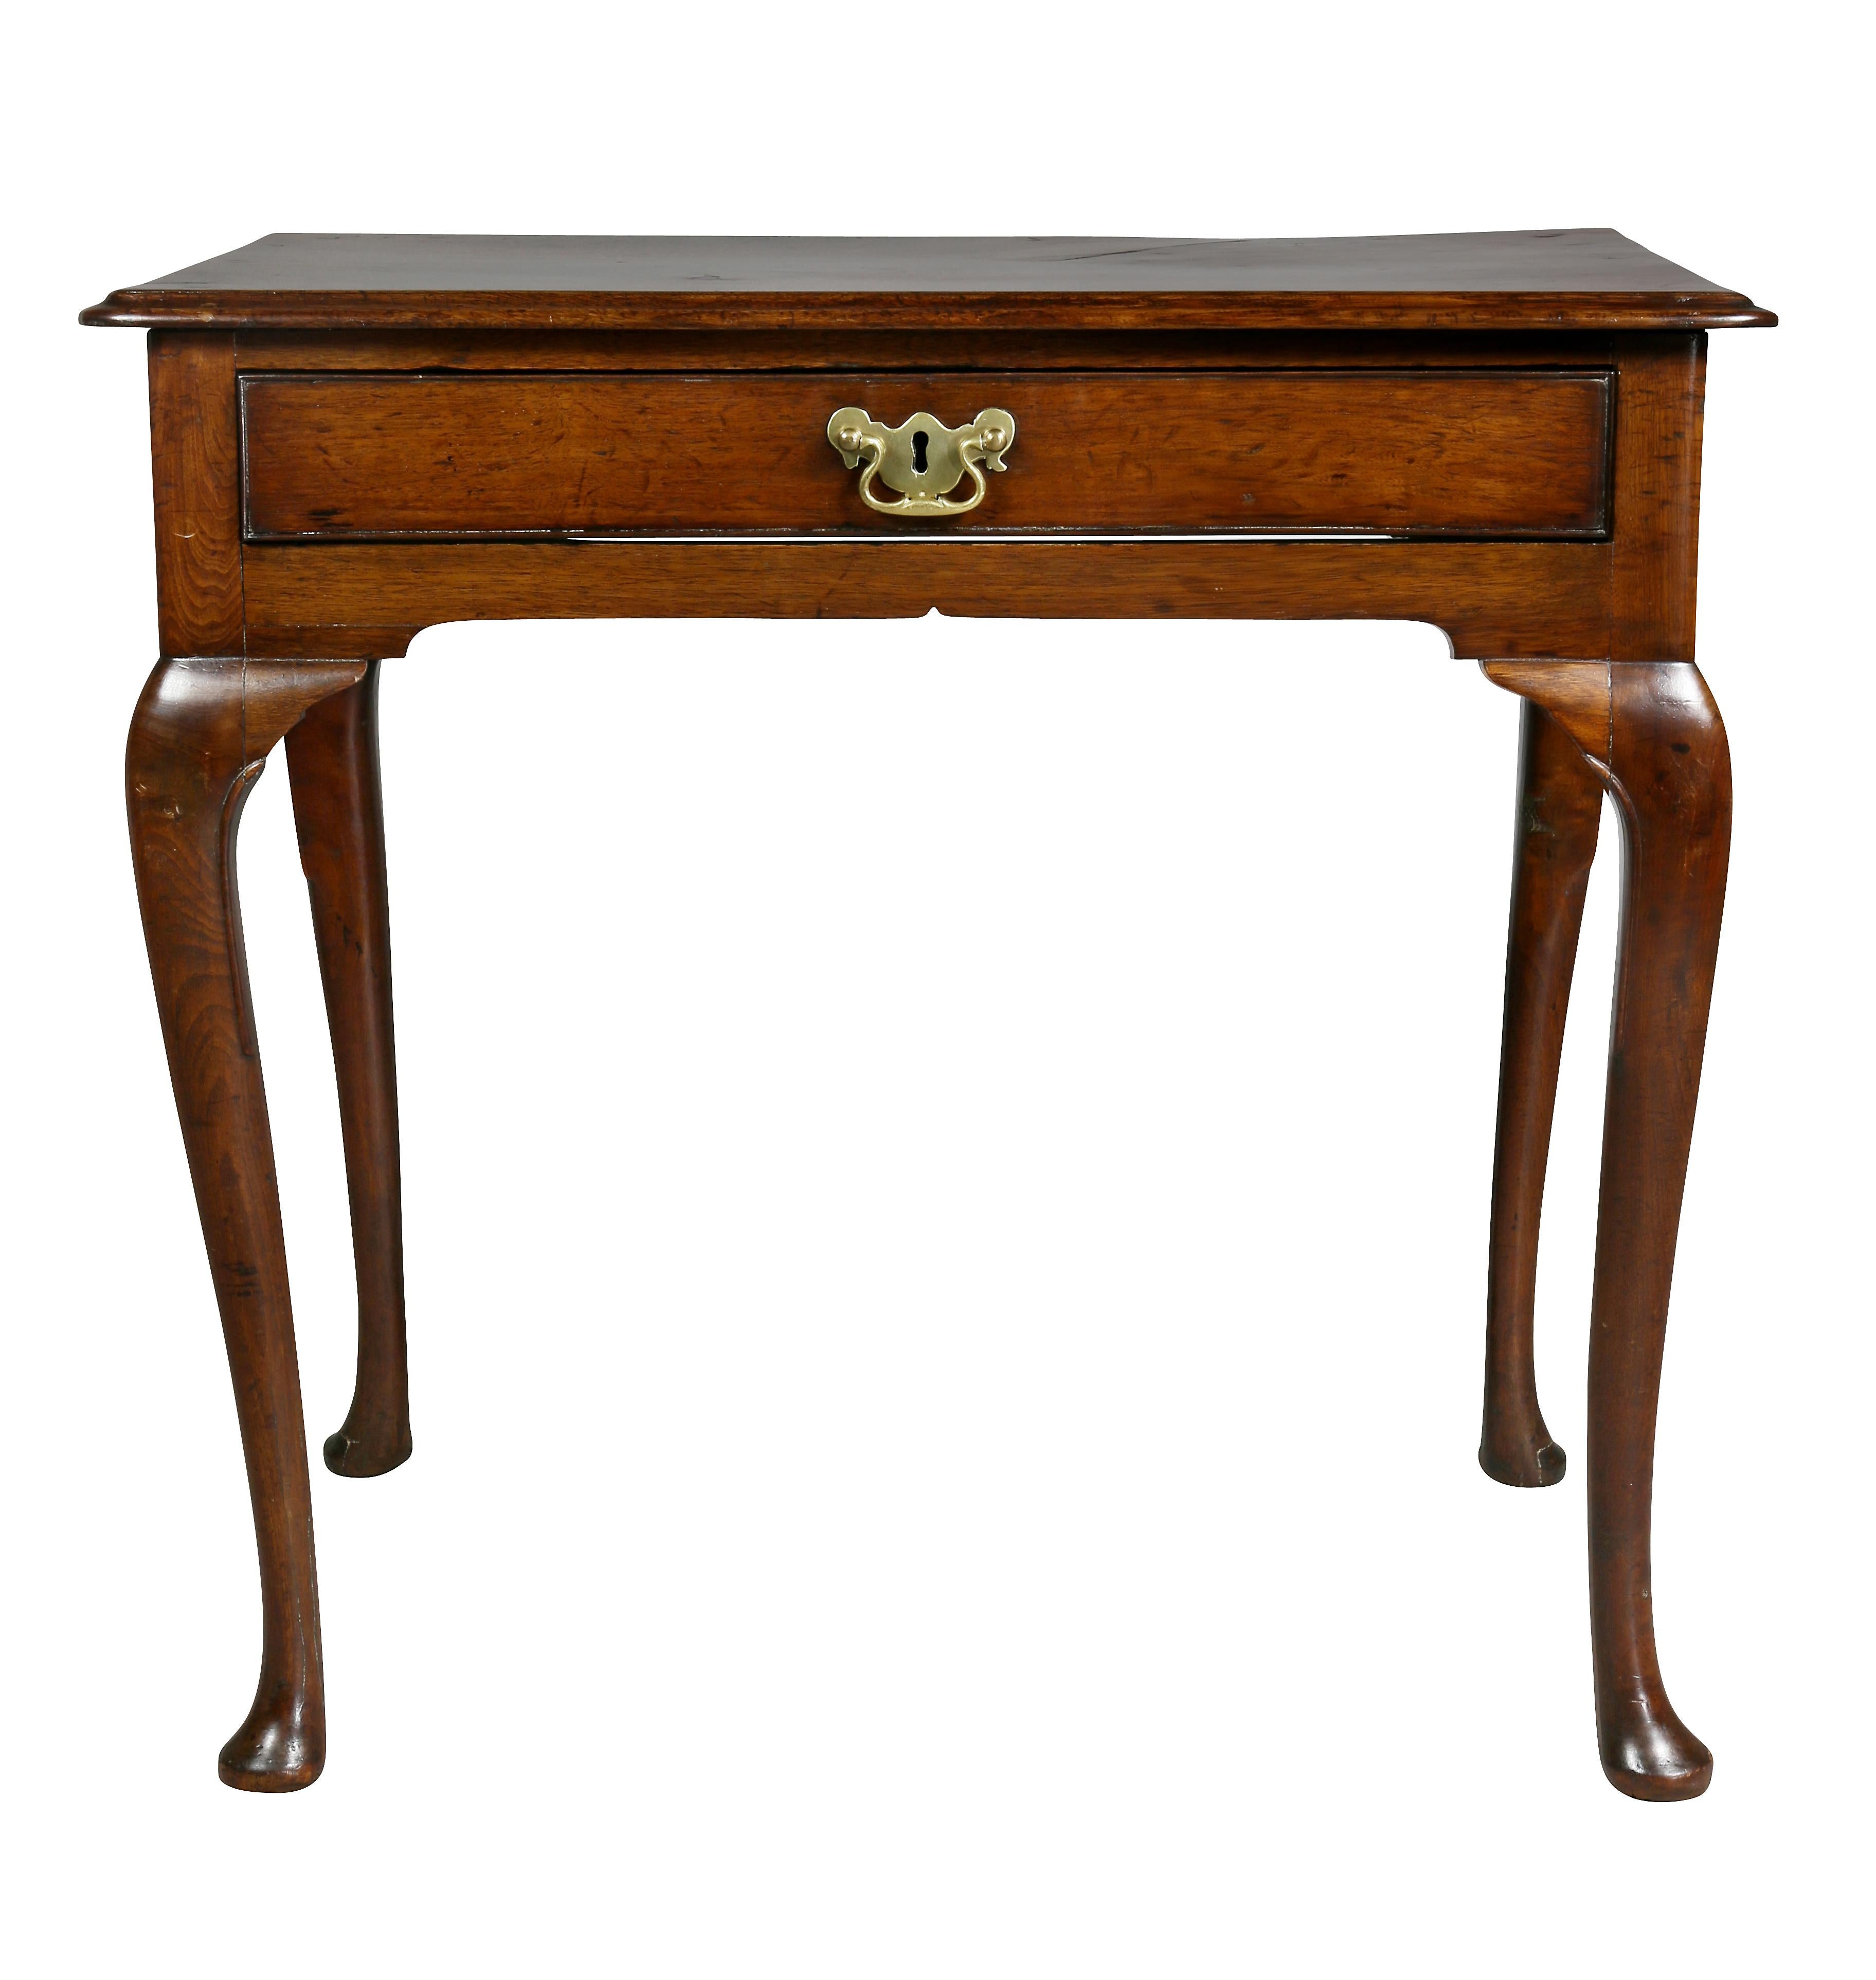 With rectangular top with rounded molded edge over a long drawer with original handle, raised on cabriole legs and ending on pad feet. Top is a solid piece of walnut.